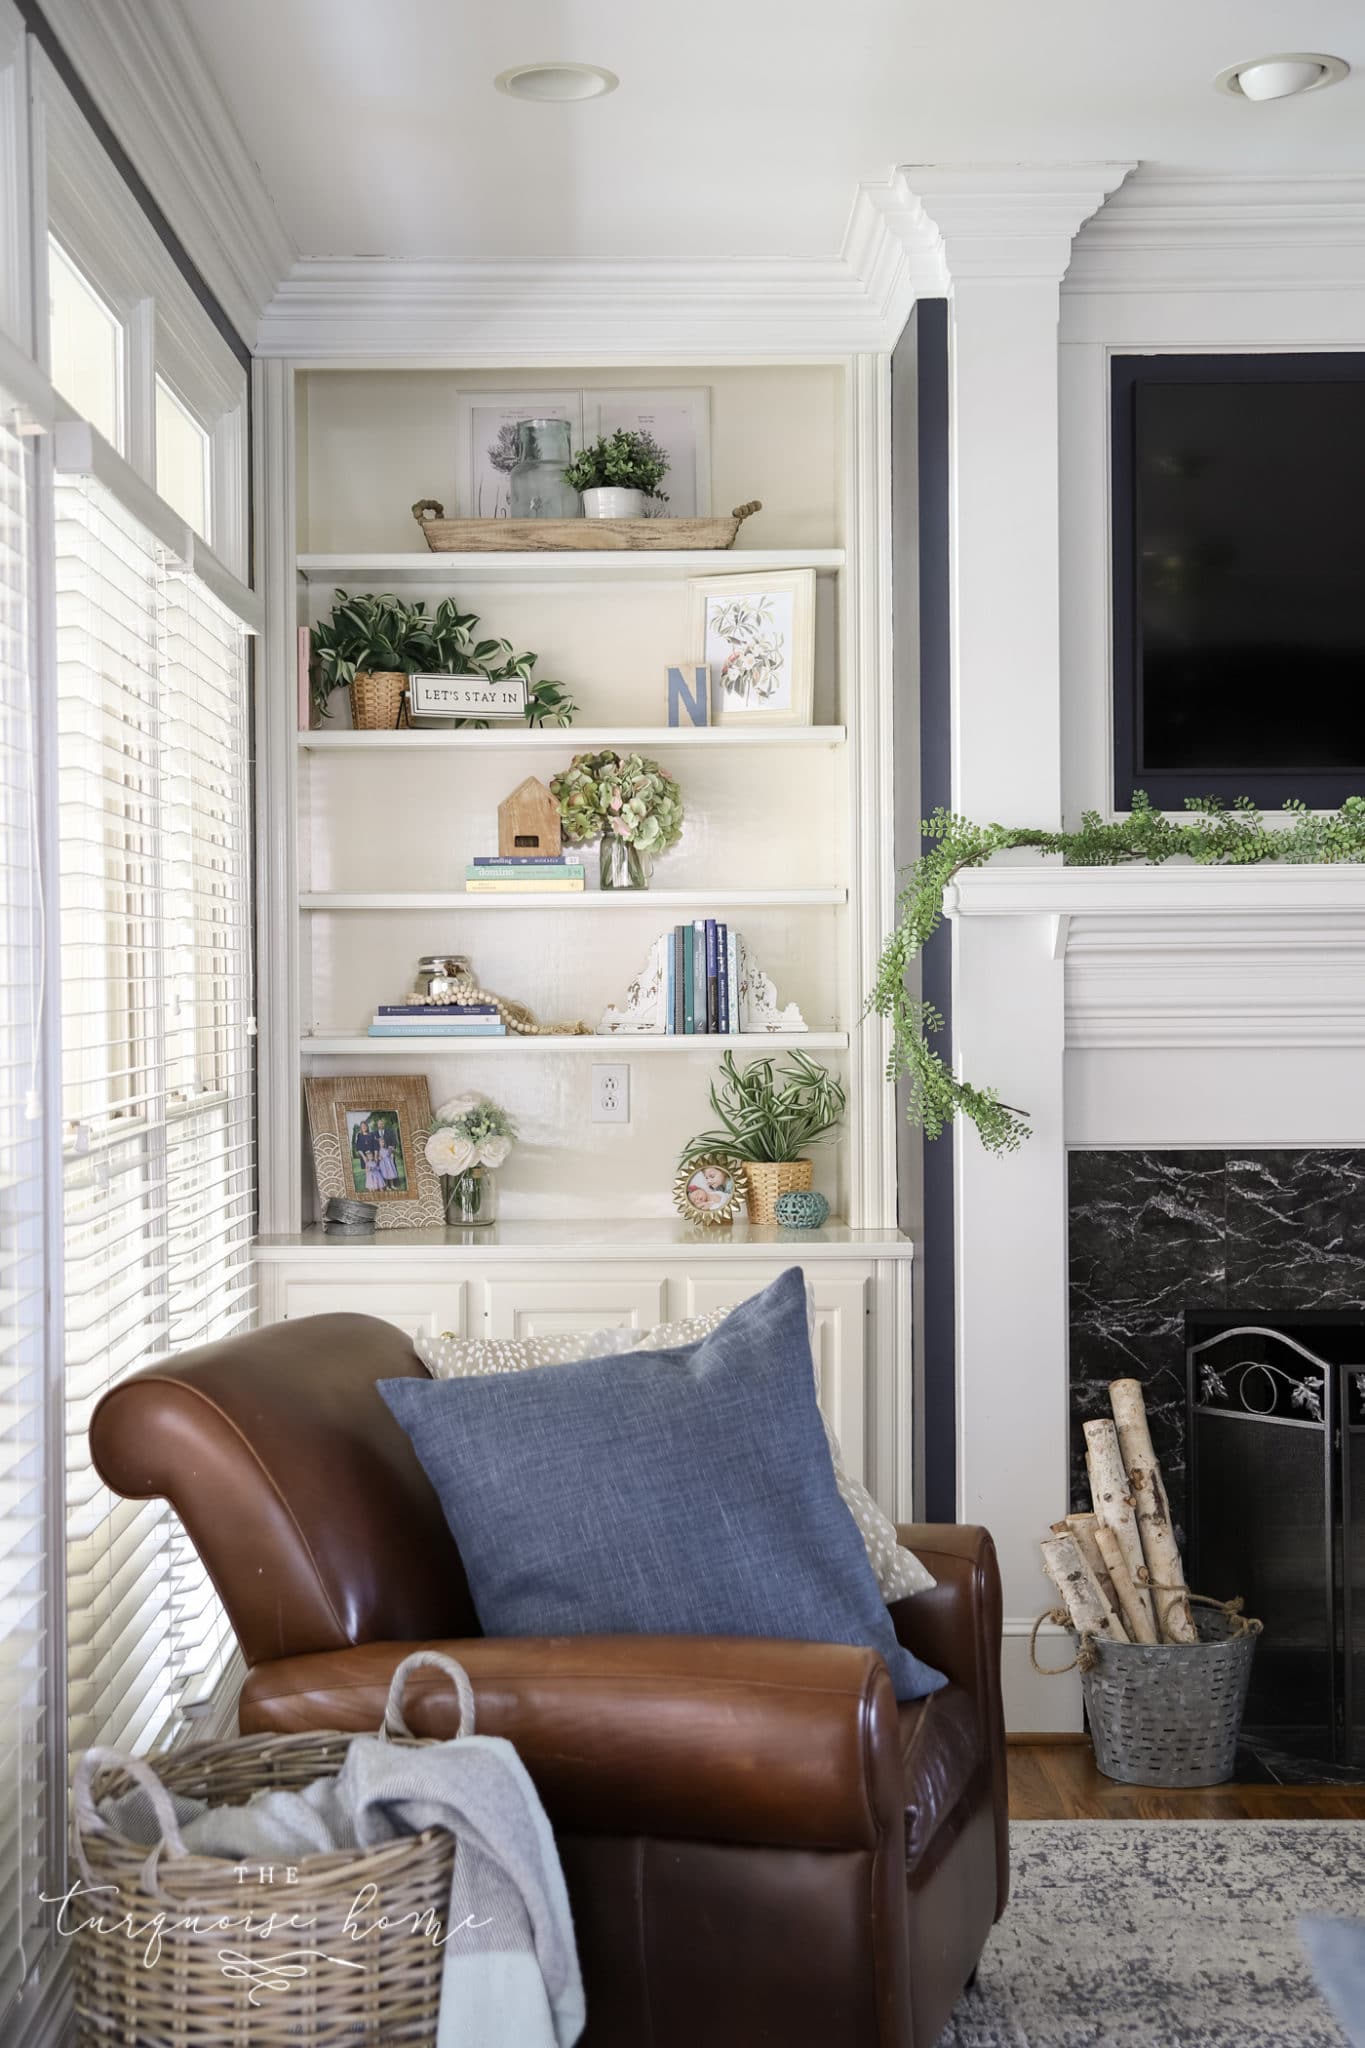 How to Decorate a Bookshelf & Styling Ideas for Bookcases